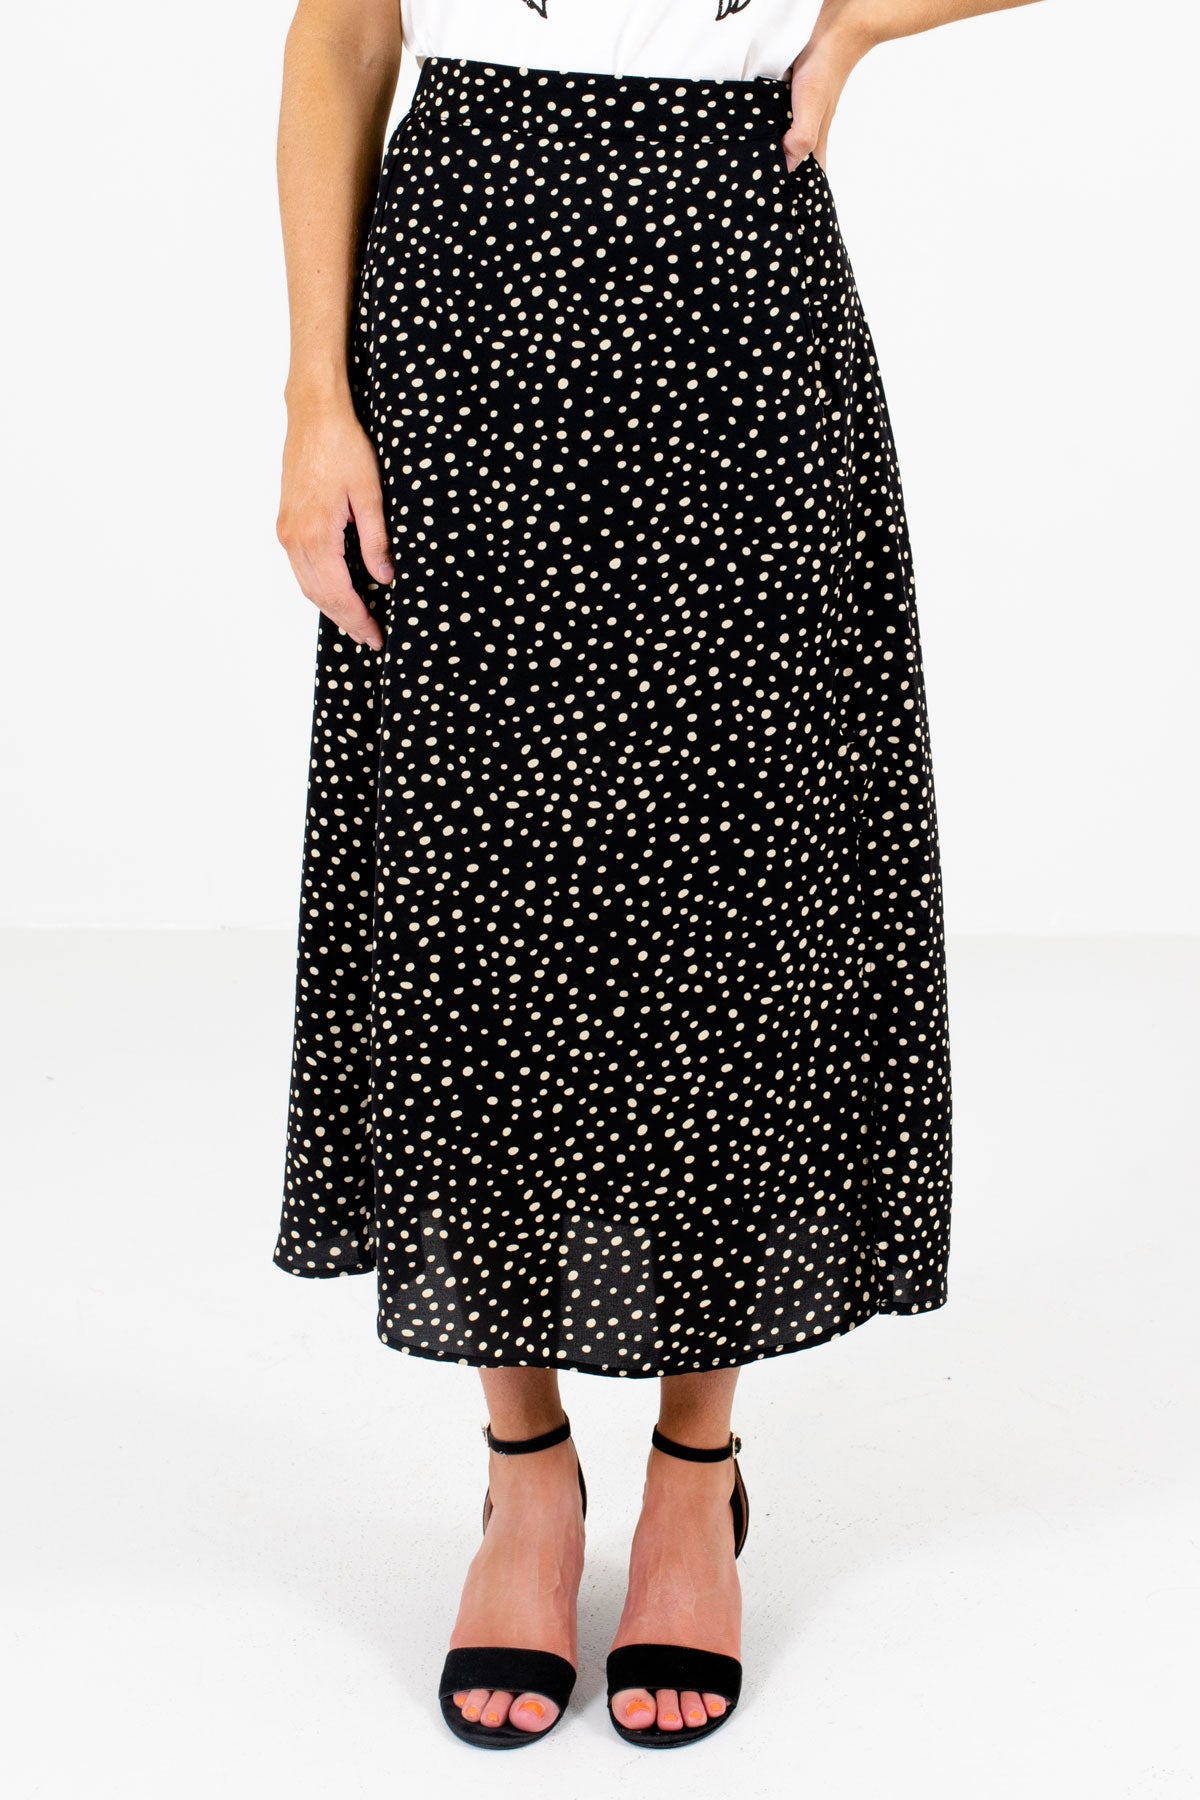 Black and Beige Polka Dot Patterned Boutique Midi Skirts for Women